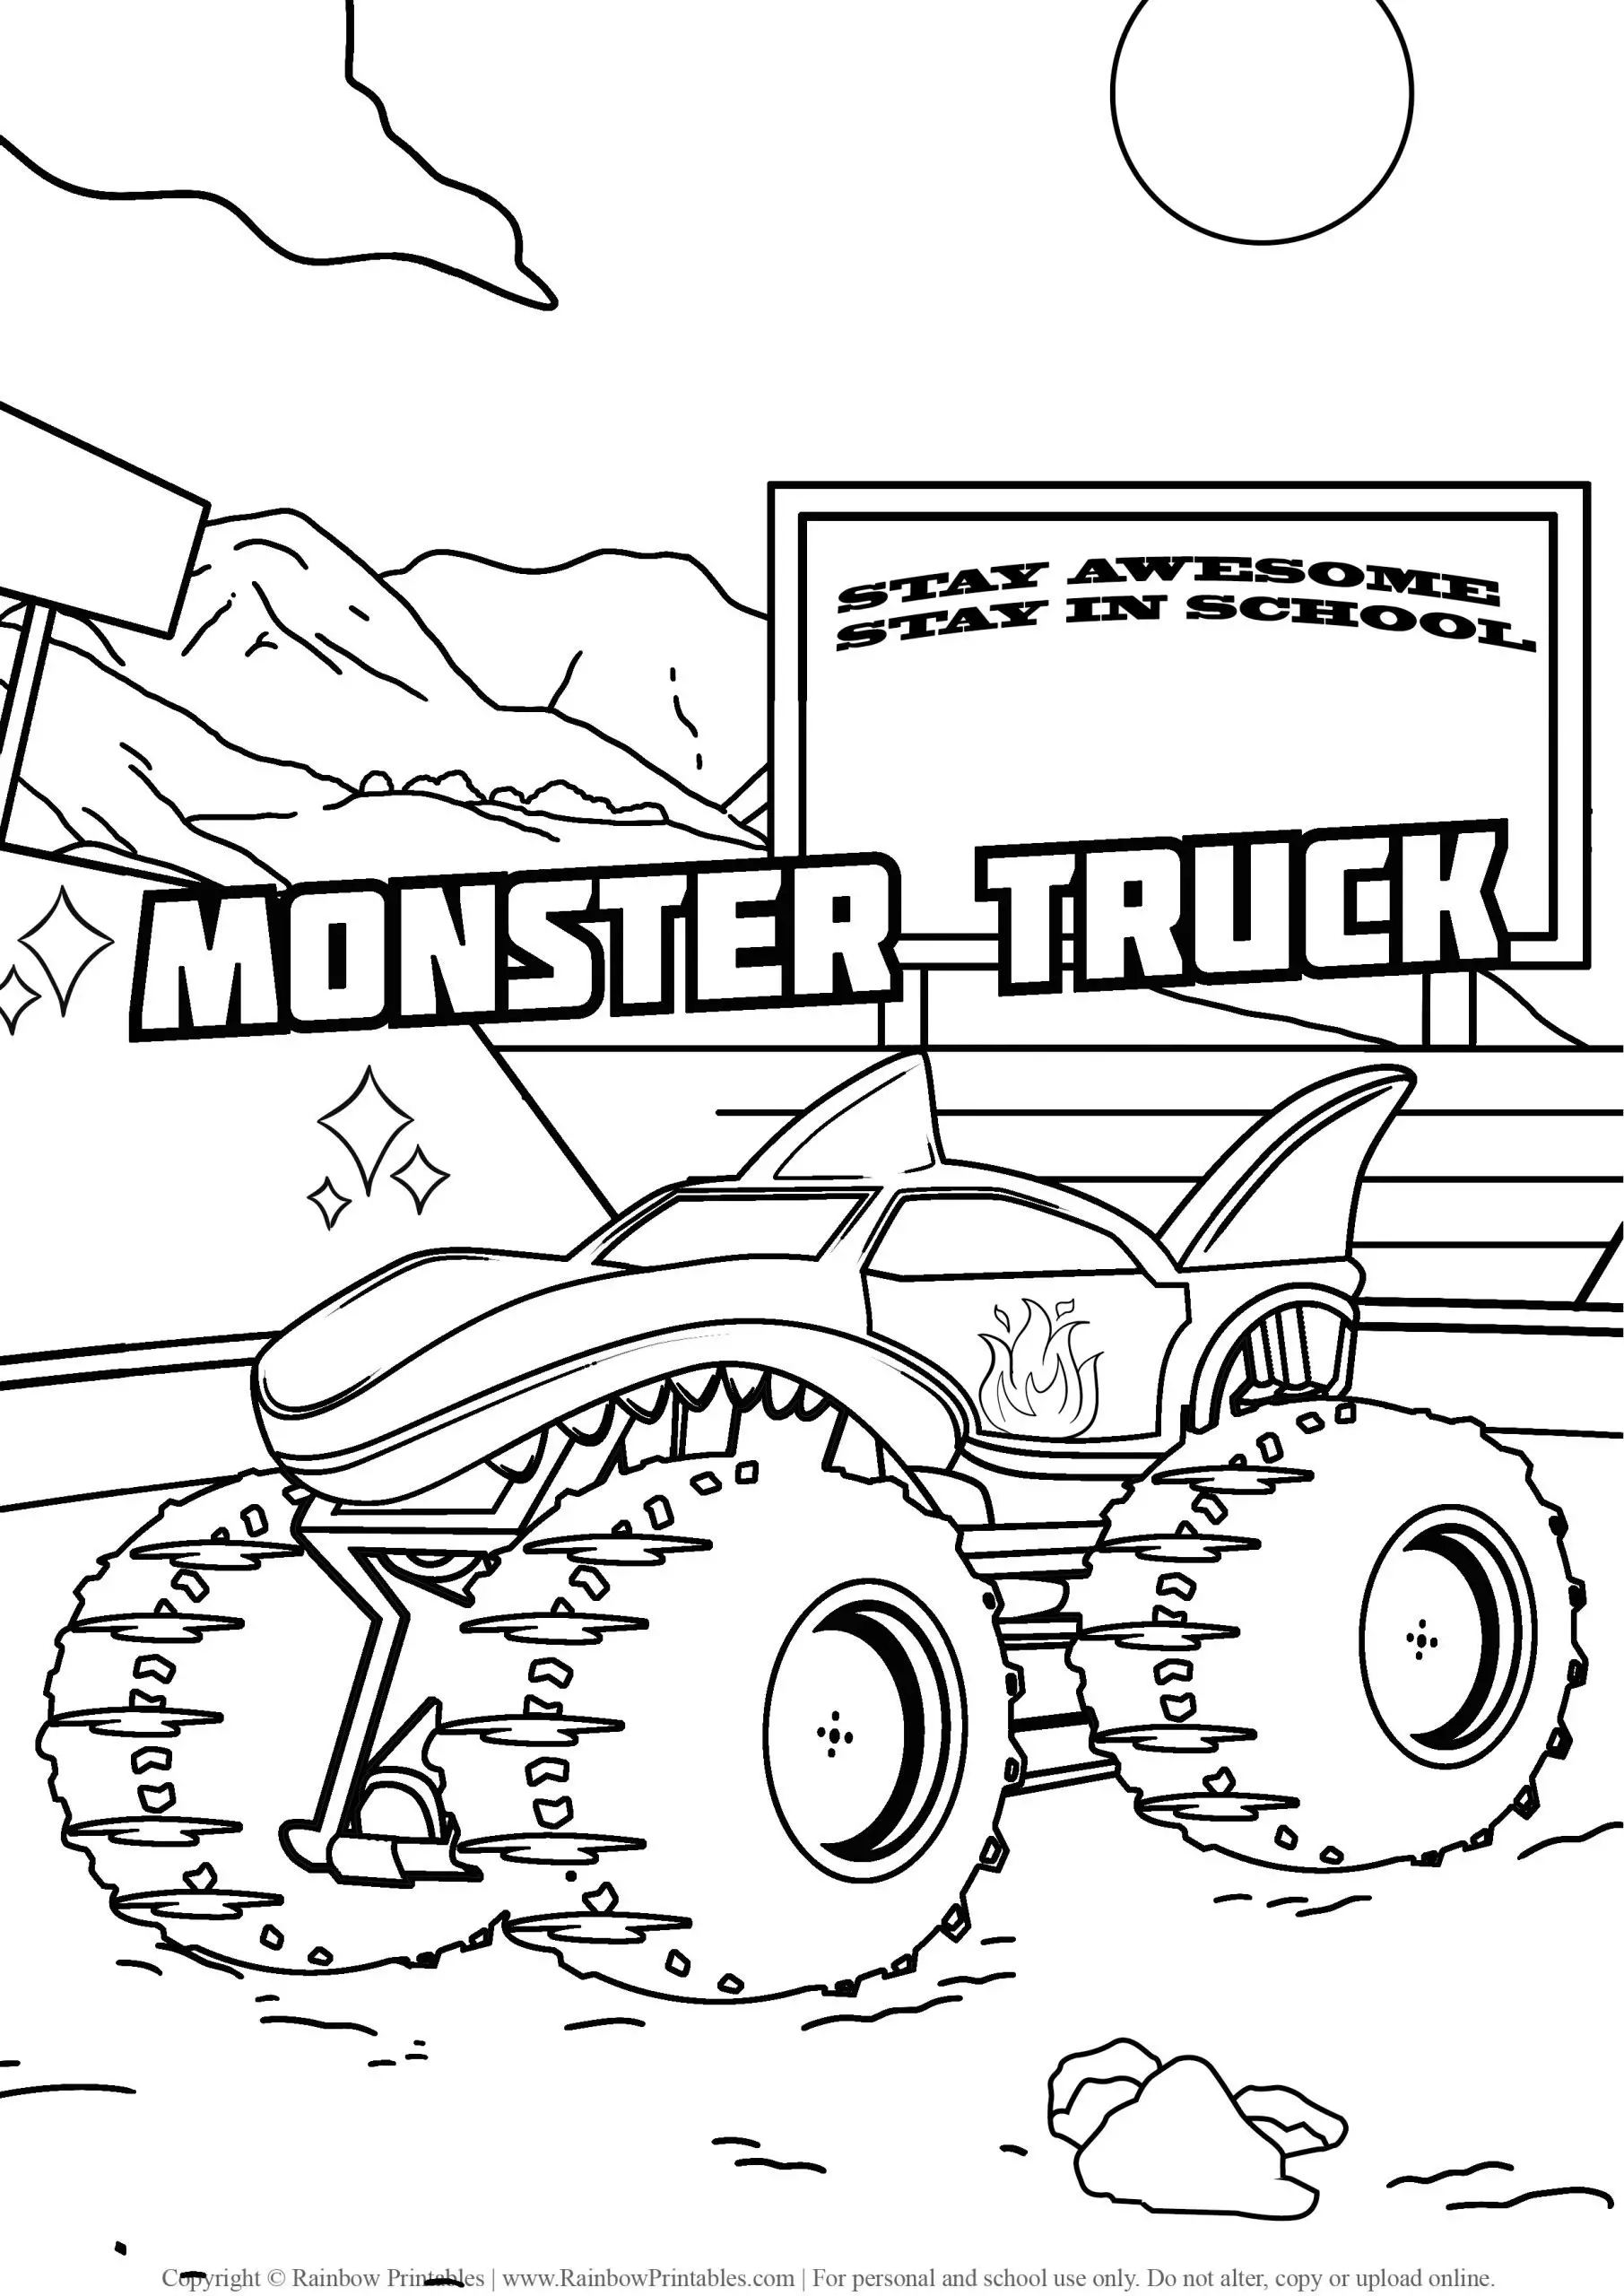 7 Free Monster Truck Coloring Pages Rainbow Printables